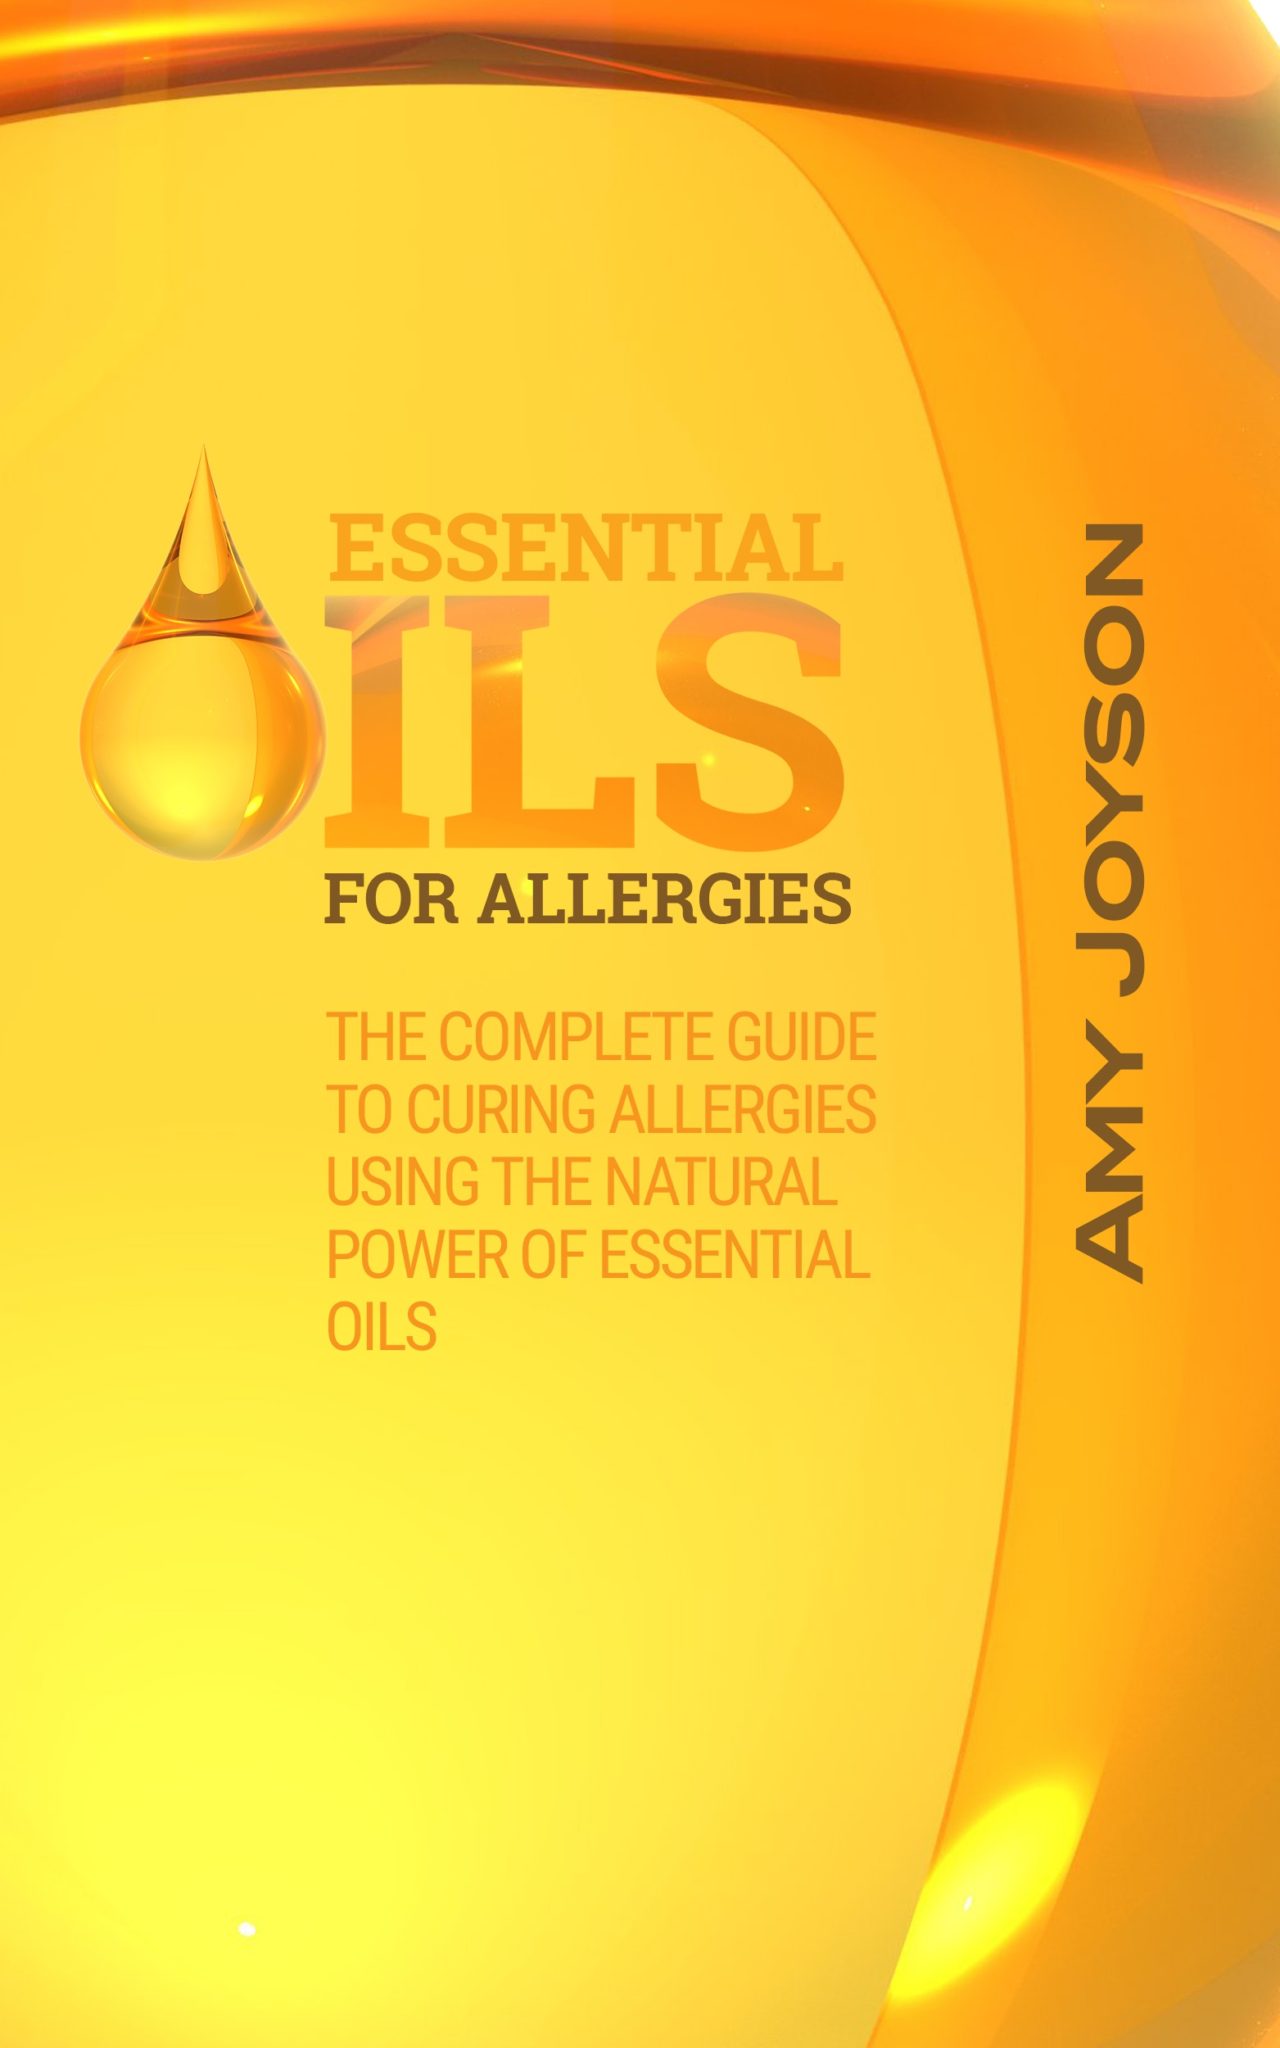 FREE: Essential Oils For Allergies: The Complete Guide To Curing Allergies Using The Natural Power Of Essential Oils by Amy Joyson